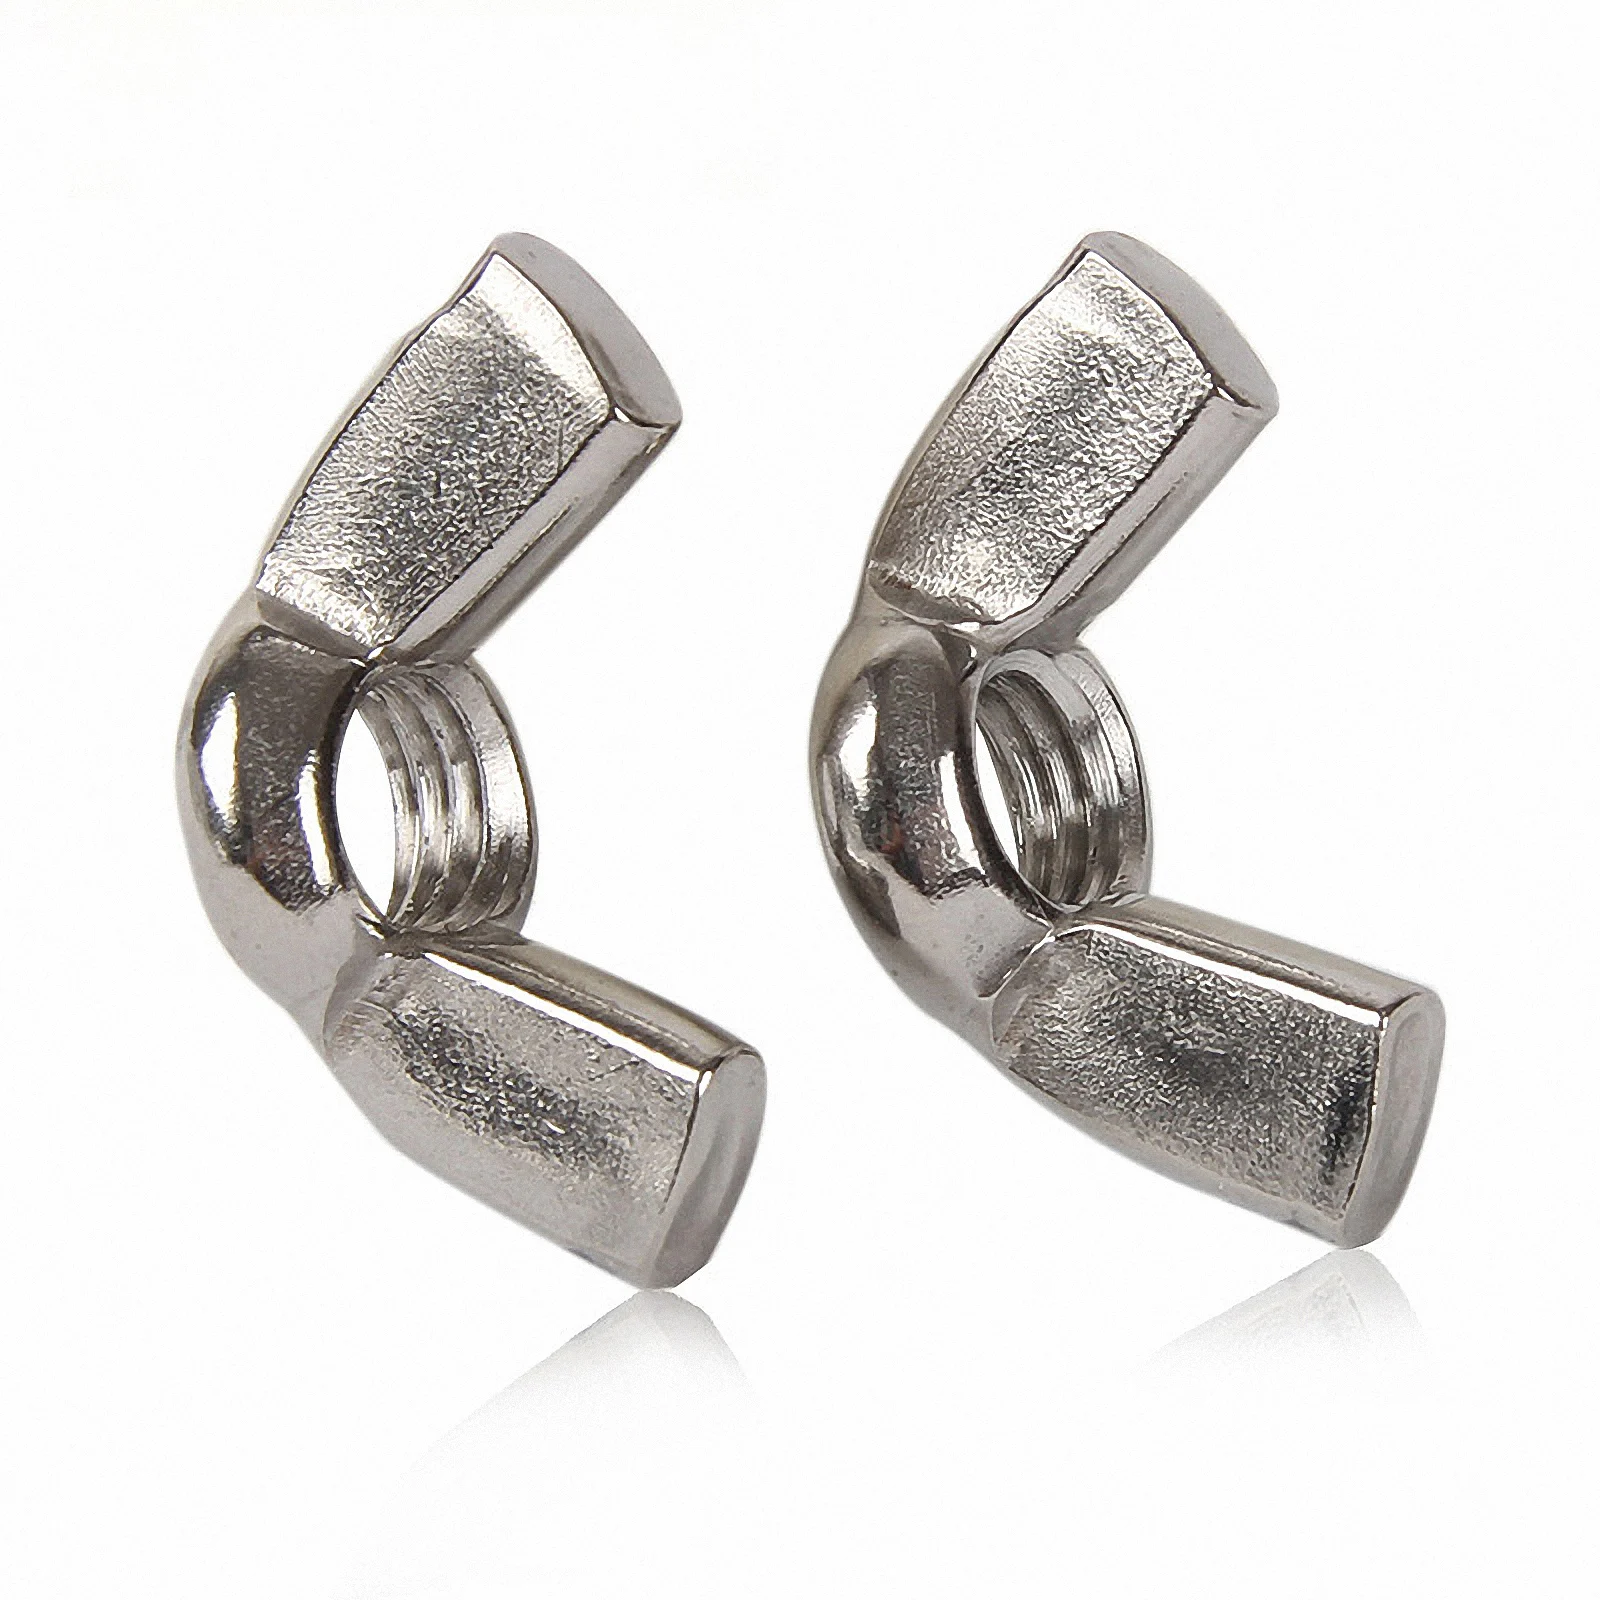 

5pcs Butterfly Wing Nuts M3 M4 M5 M6 M8 M10 M12 304 316 Stainless Steel Wing Nuts Hand Tighten Nut DIN315